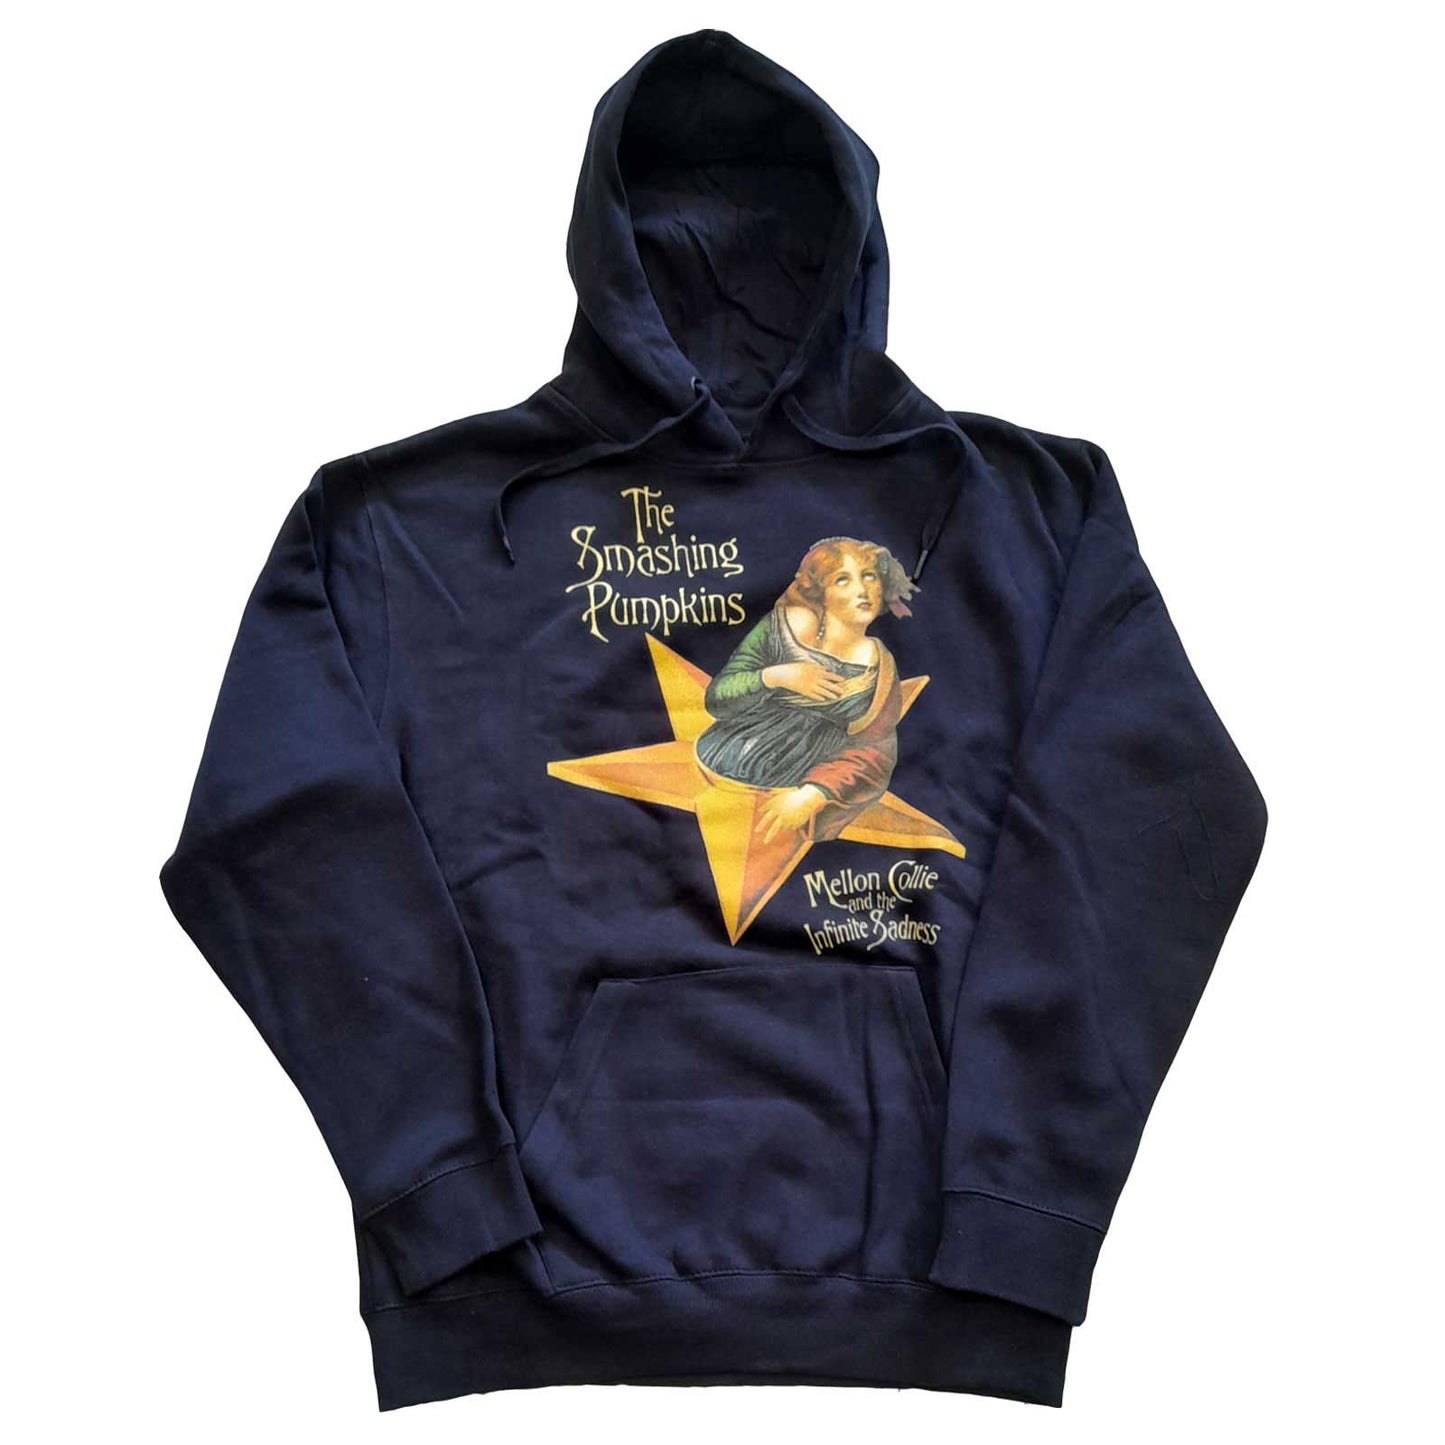 The Smashing Pumpkins Pullover Hoodie: Mellon Collie